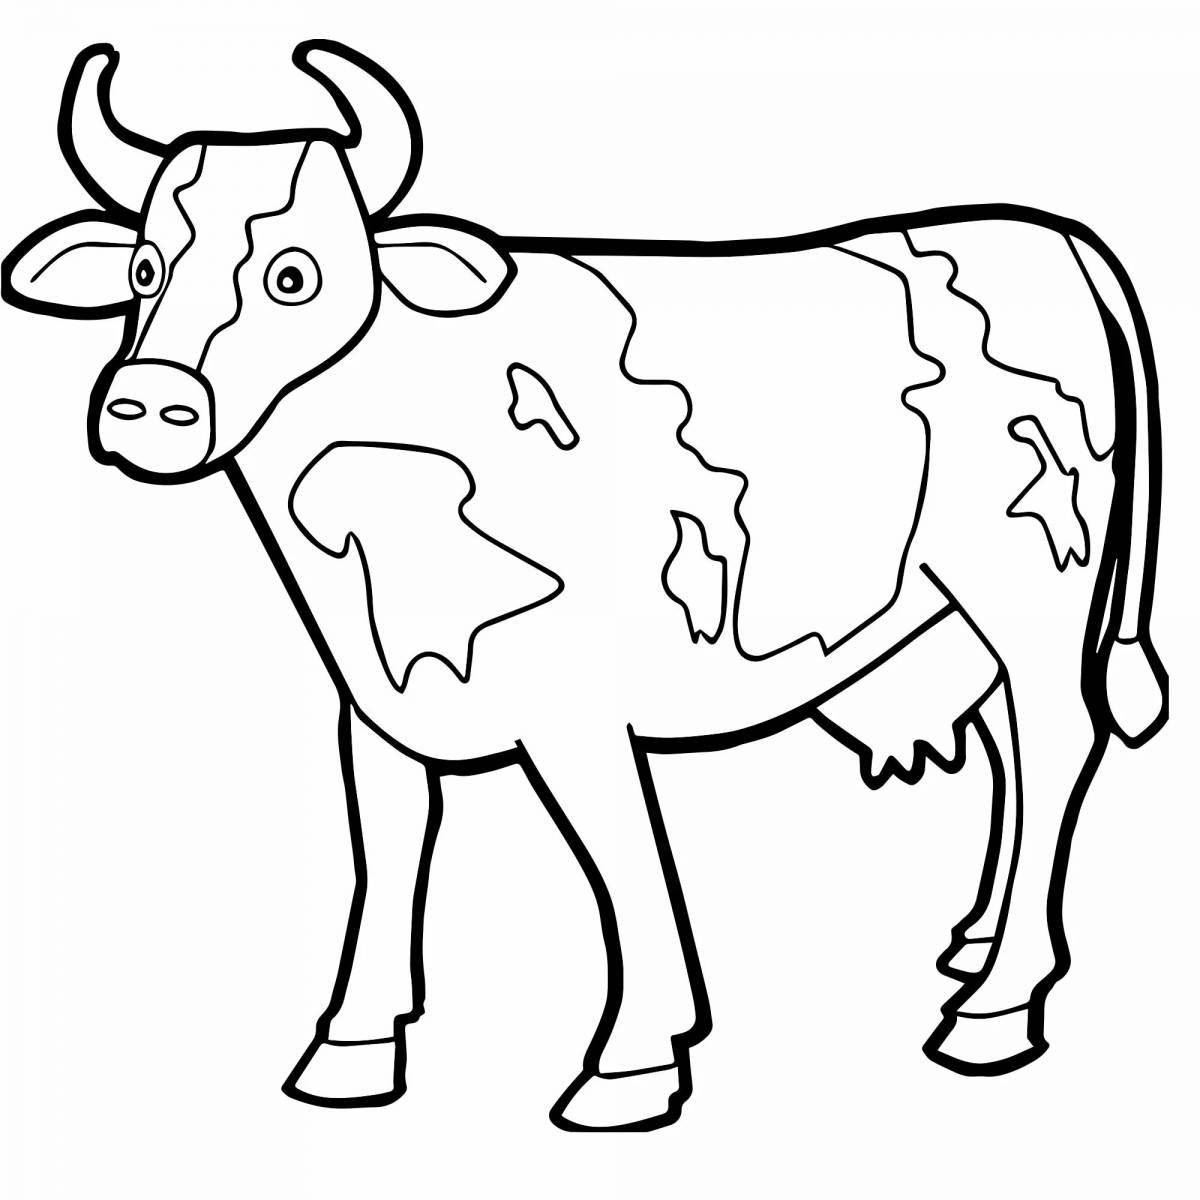 Cow coloring pages for 4-5 year olds